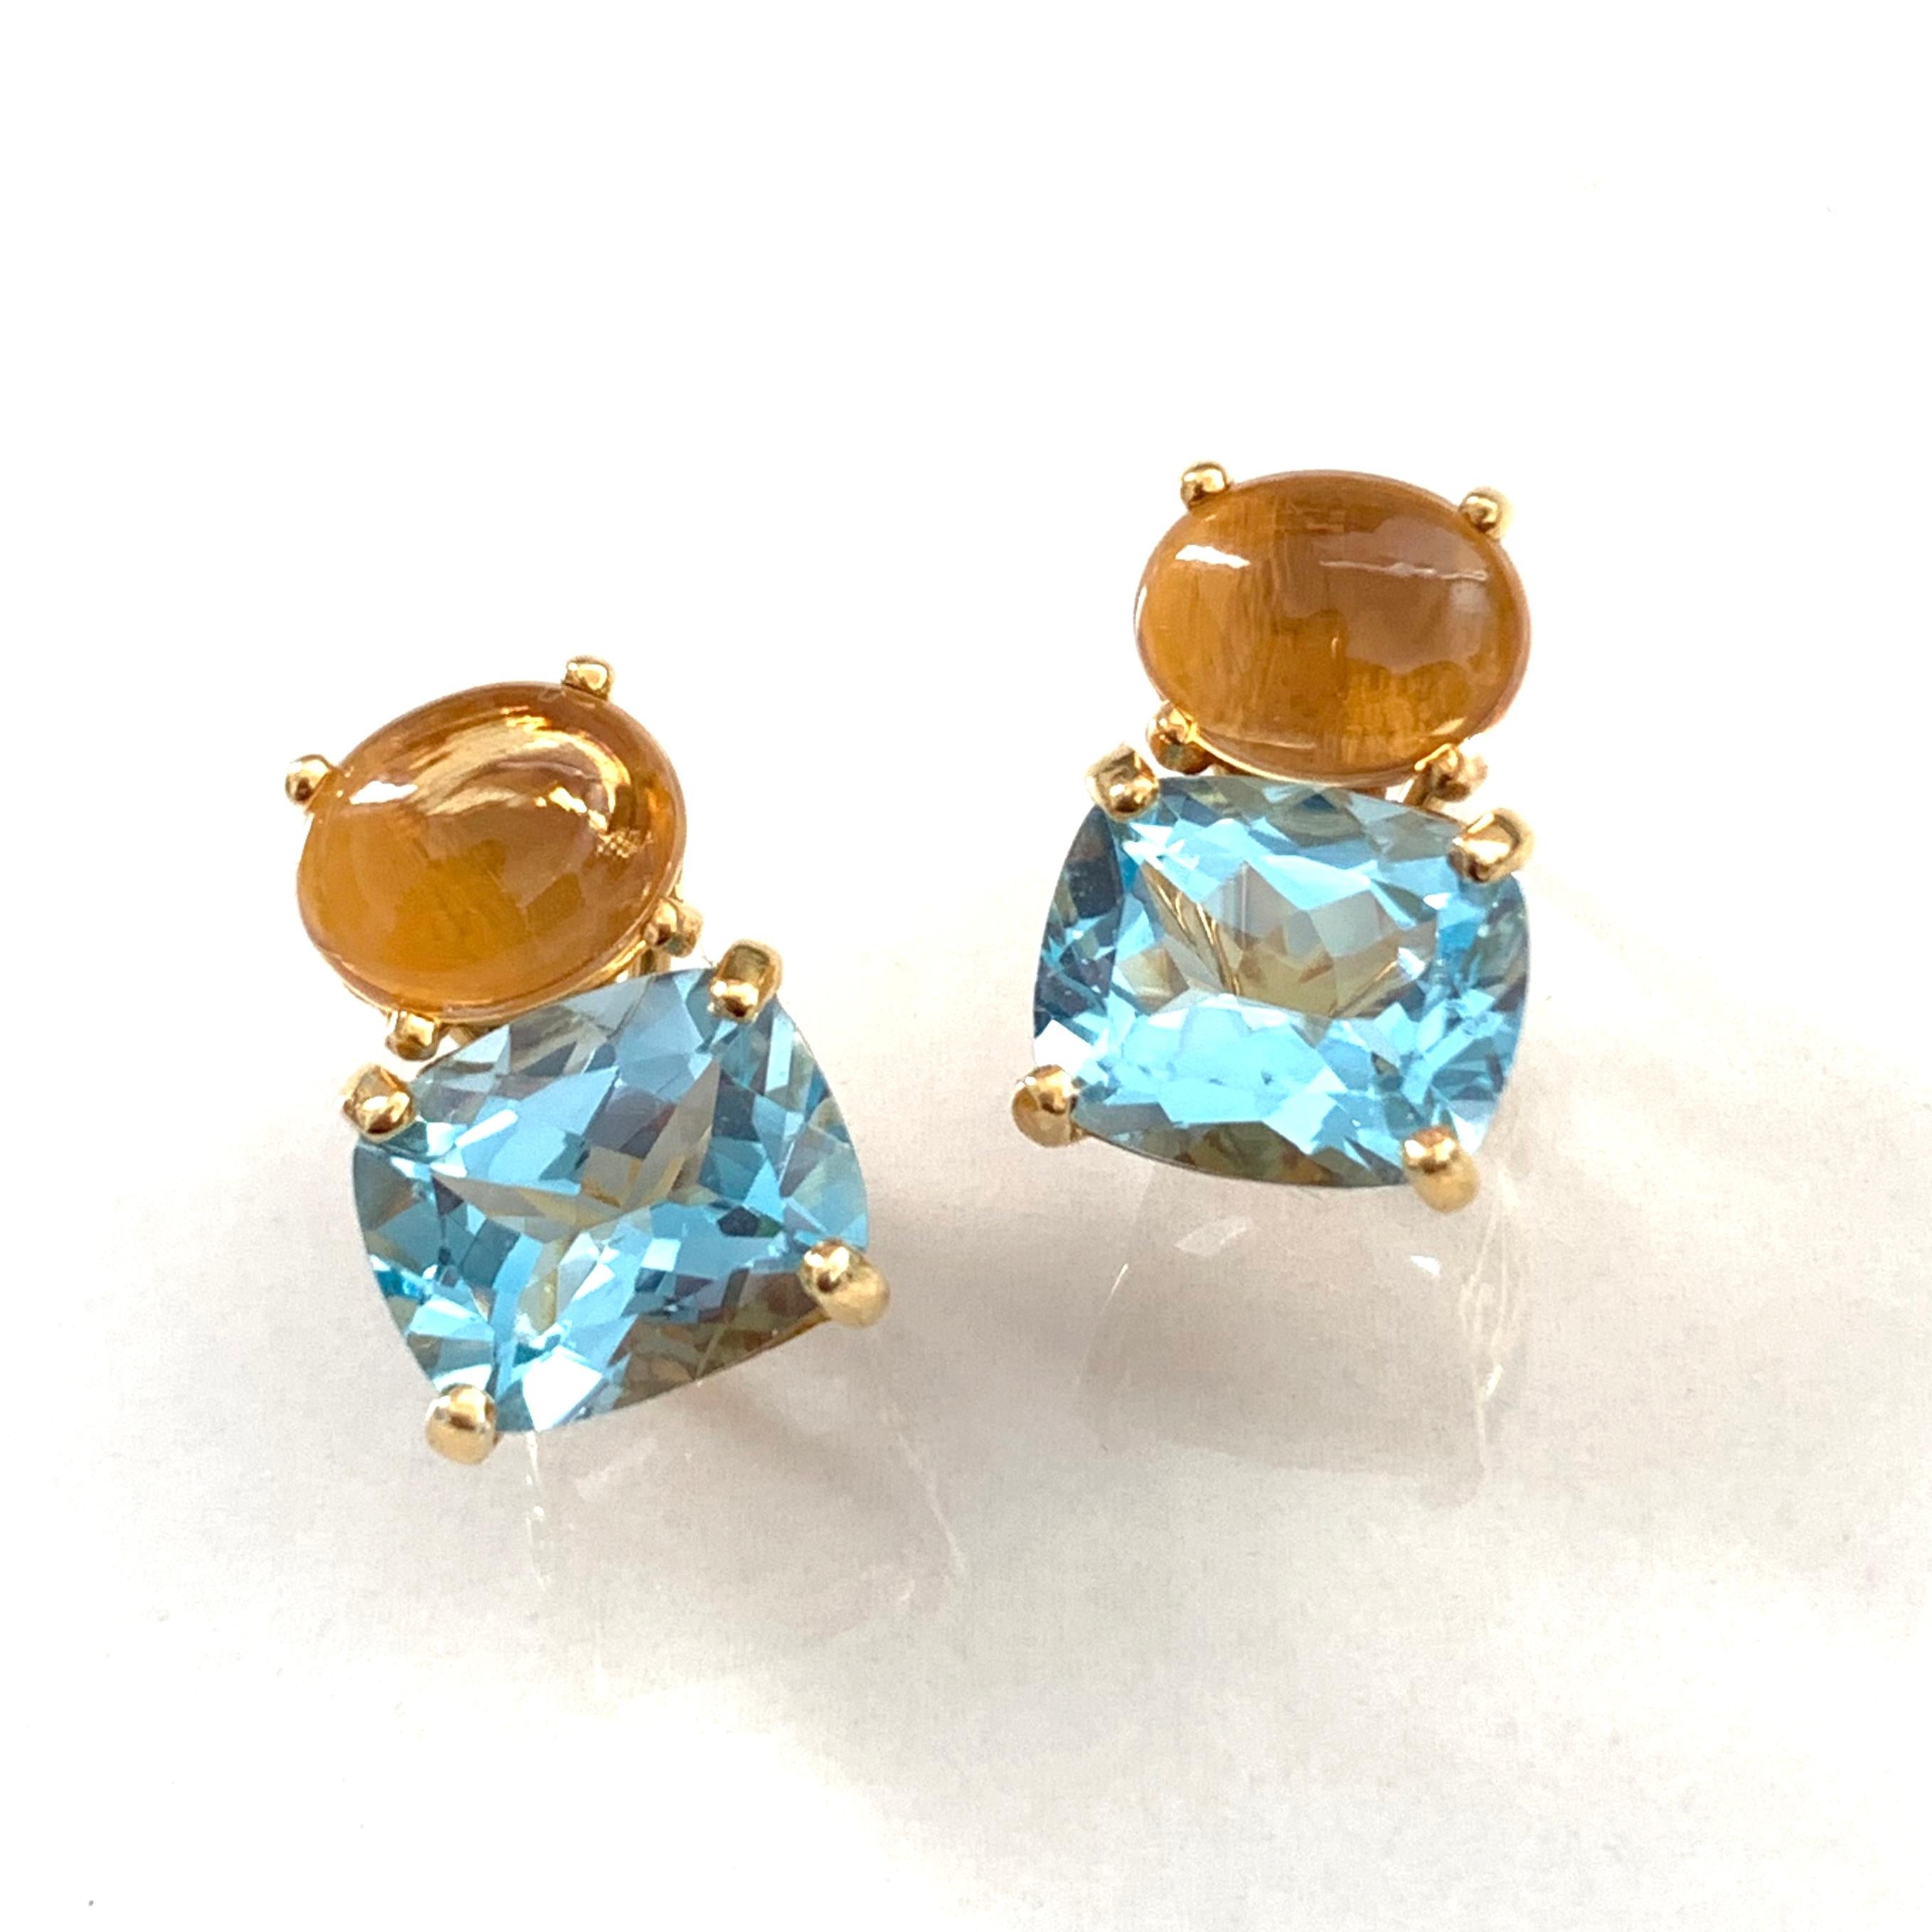 These stunning pair of earrings features a pair of genuine oval cabochon-cut Brazilian citrine with faceted cushion-cut sky blue topaz, handset in 18k yellow gold vermeil over sterling silver. The facet and cabochon combination creates beautiful